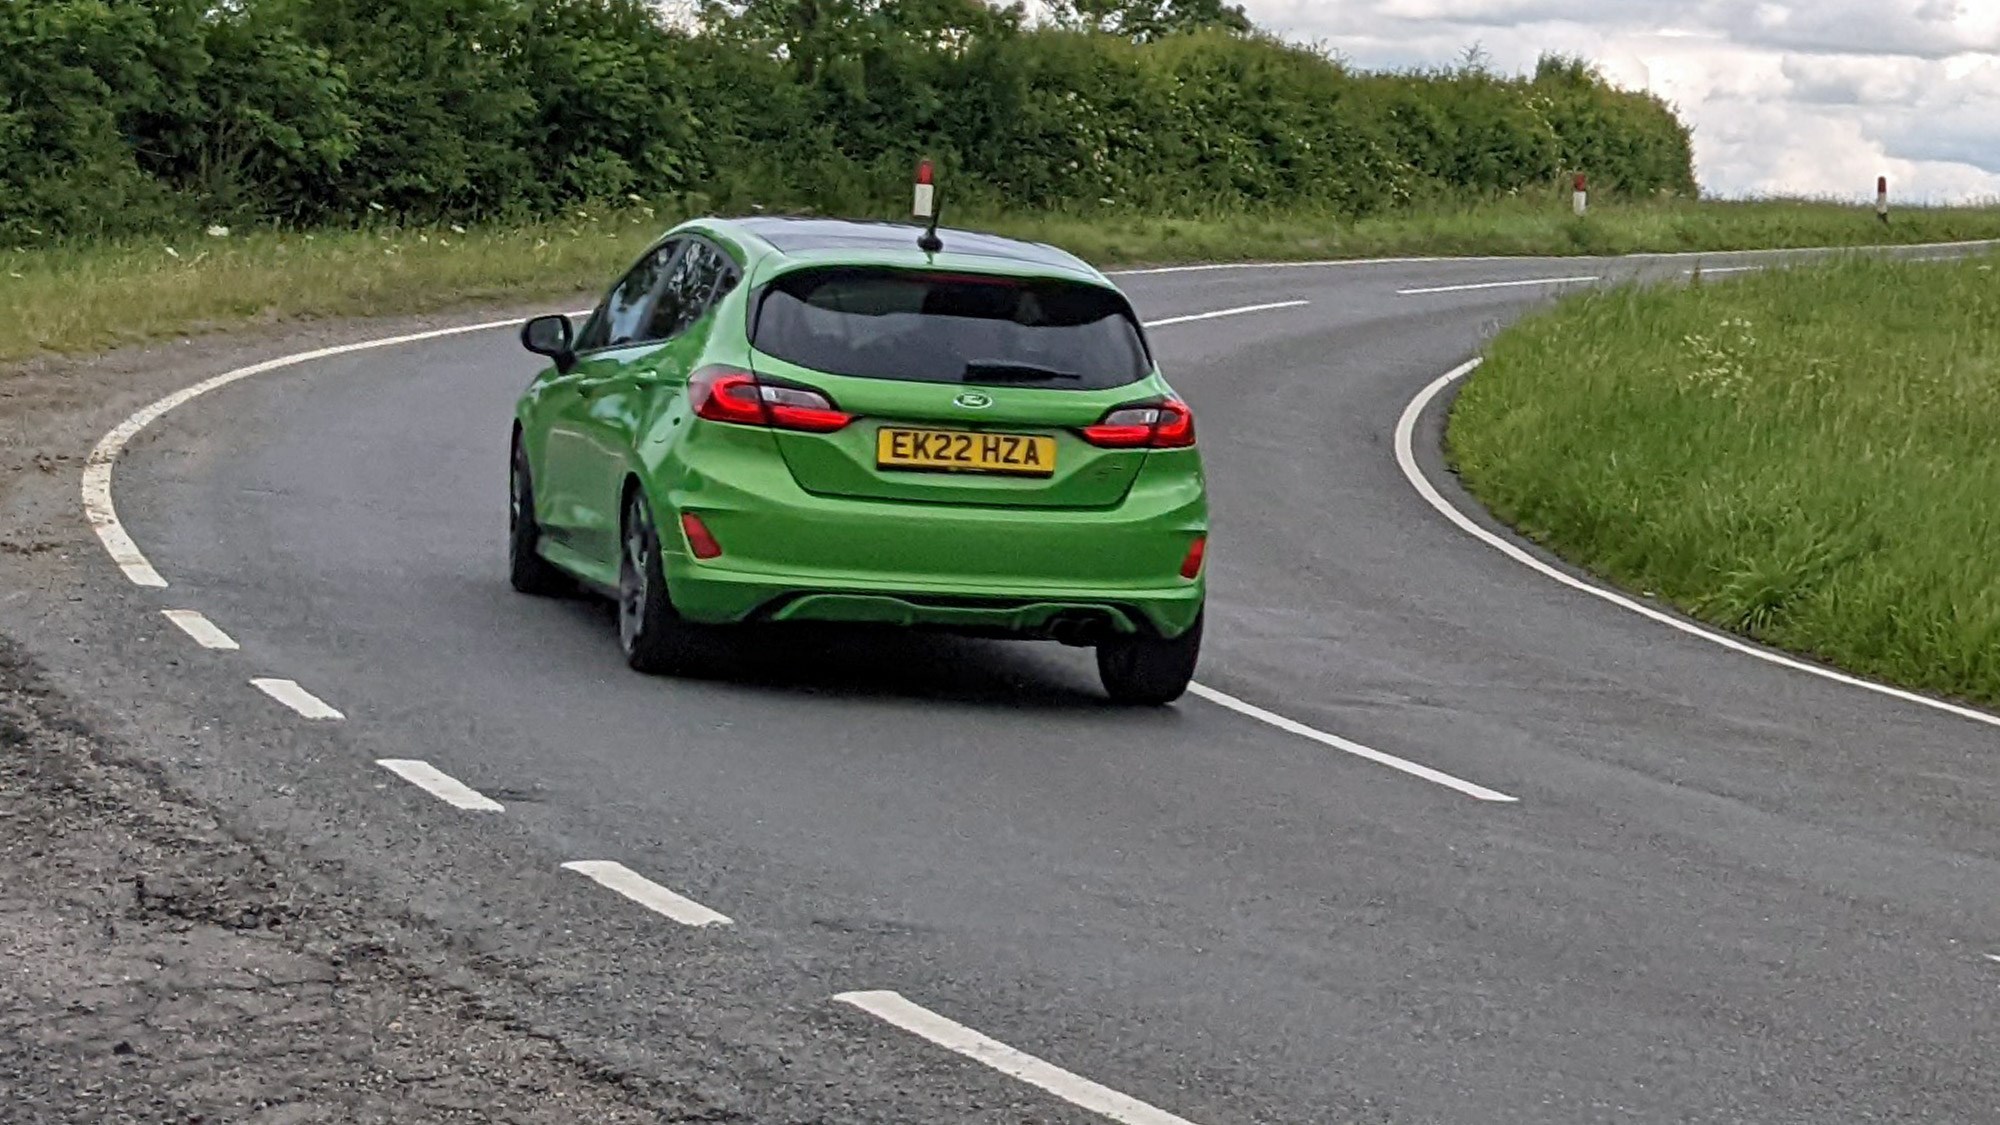 Ford Fiesta ST 2022 facelift five-door, rear view, Mean Green, ST-3, driving round corner